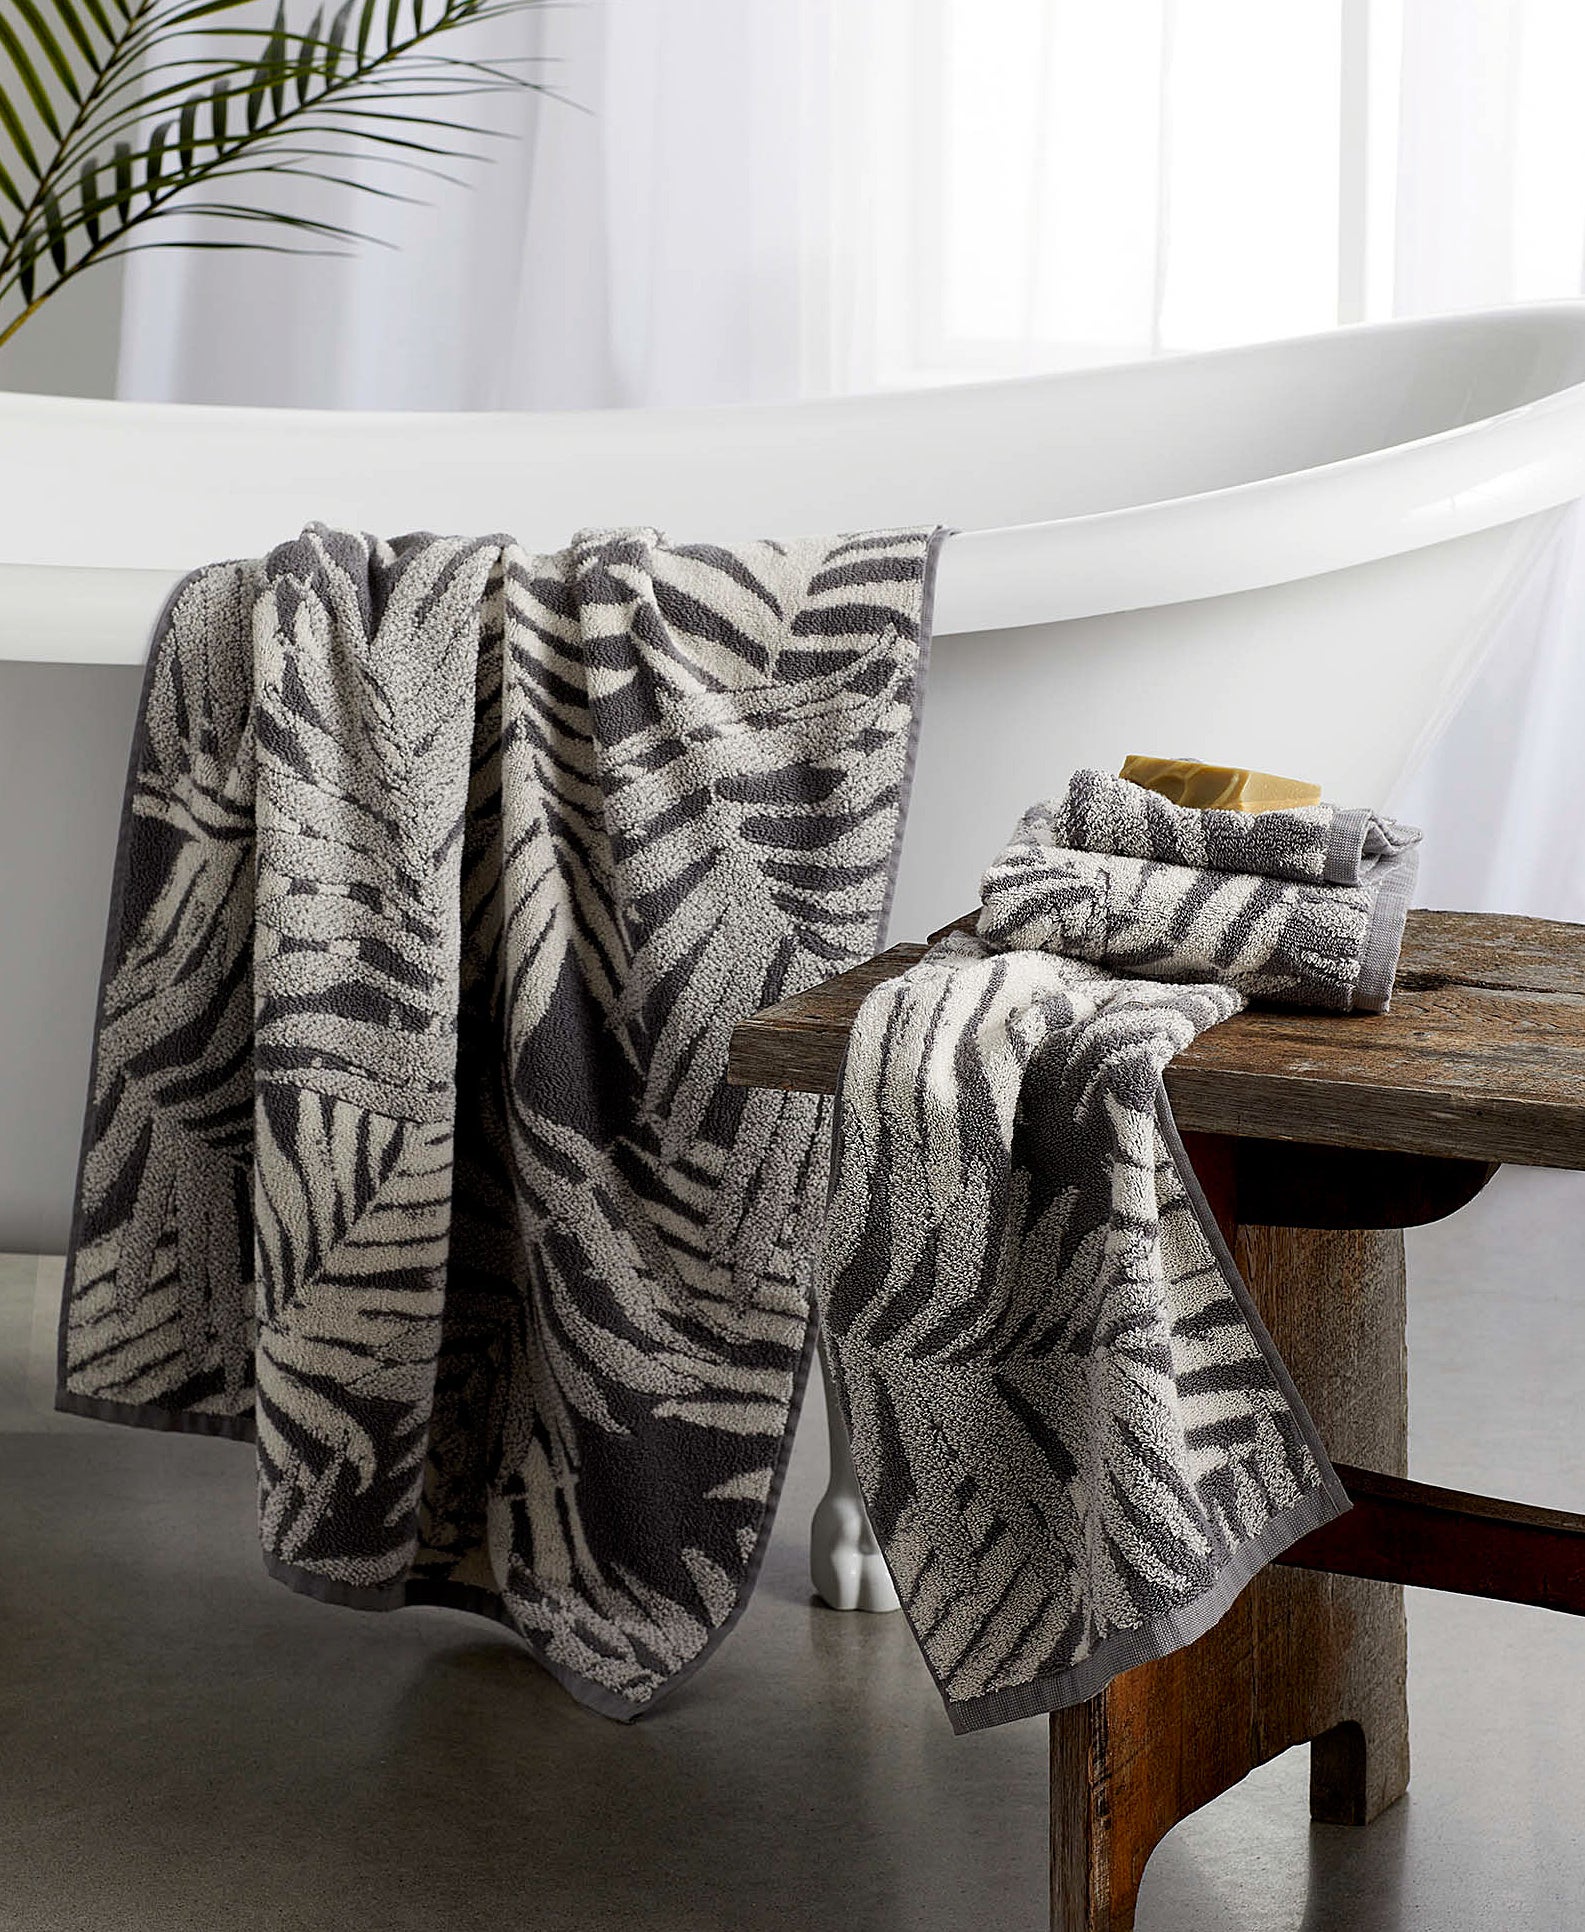 two towels with palm leaf patterns in a bathroom